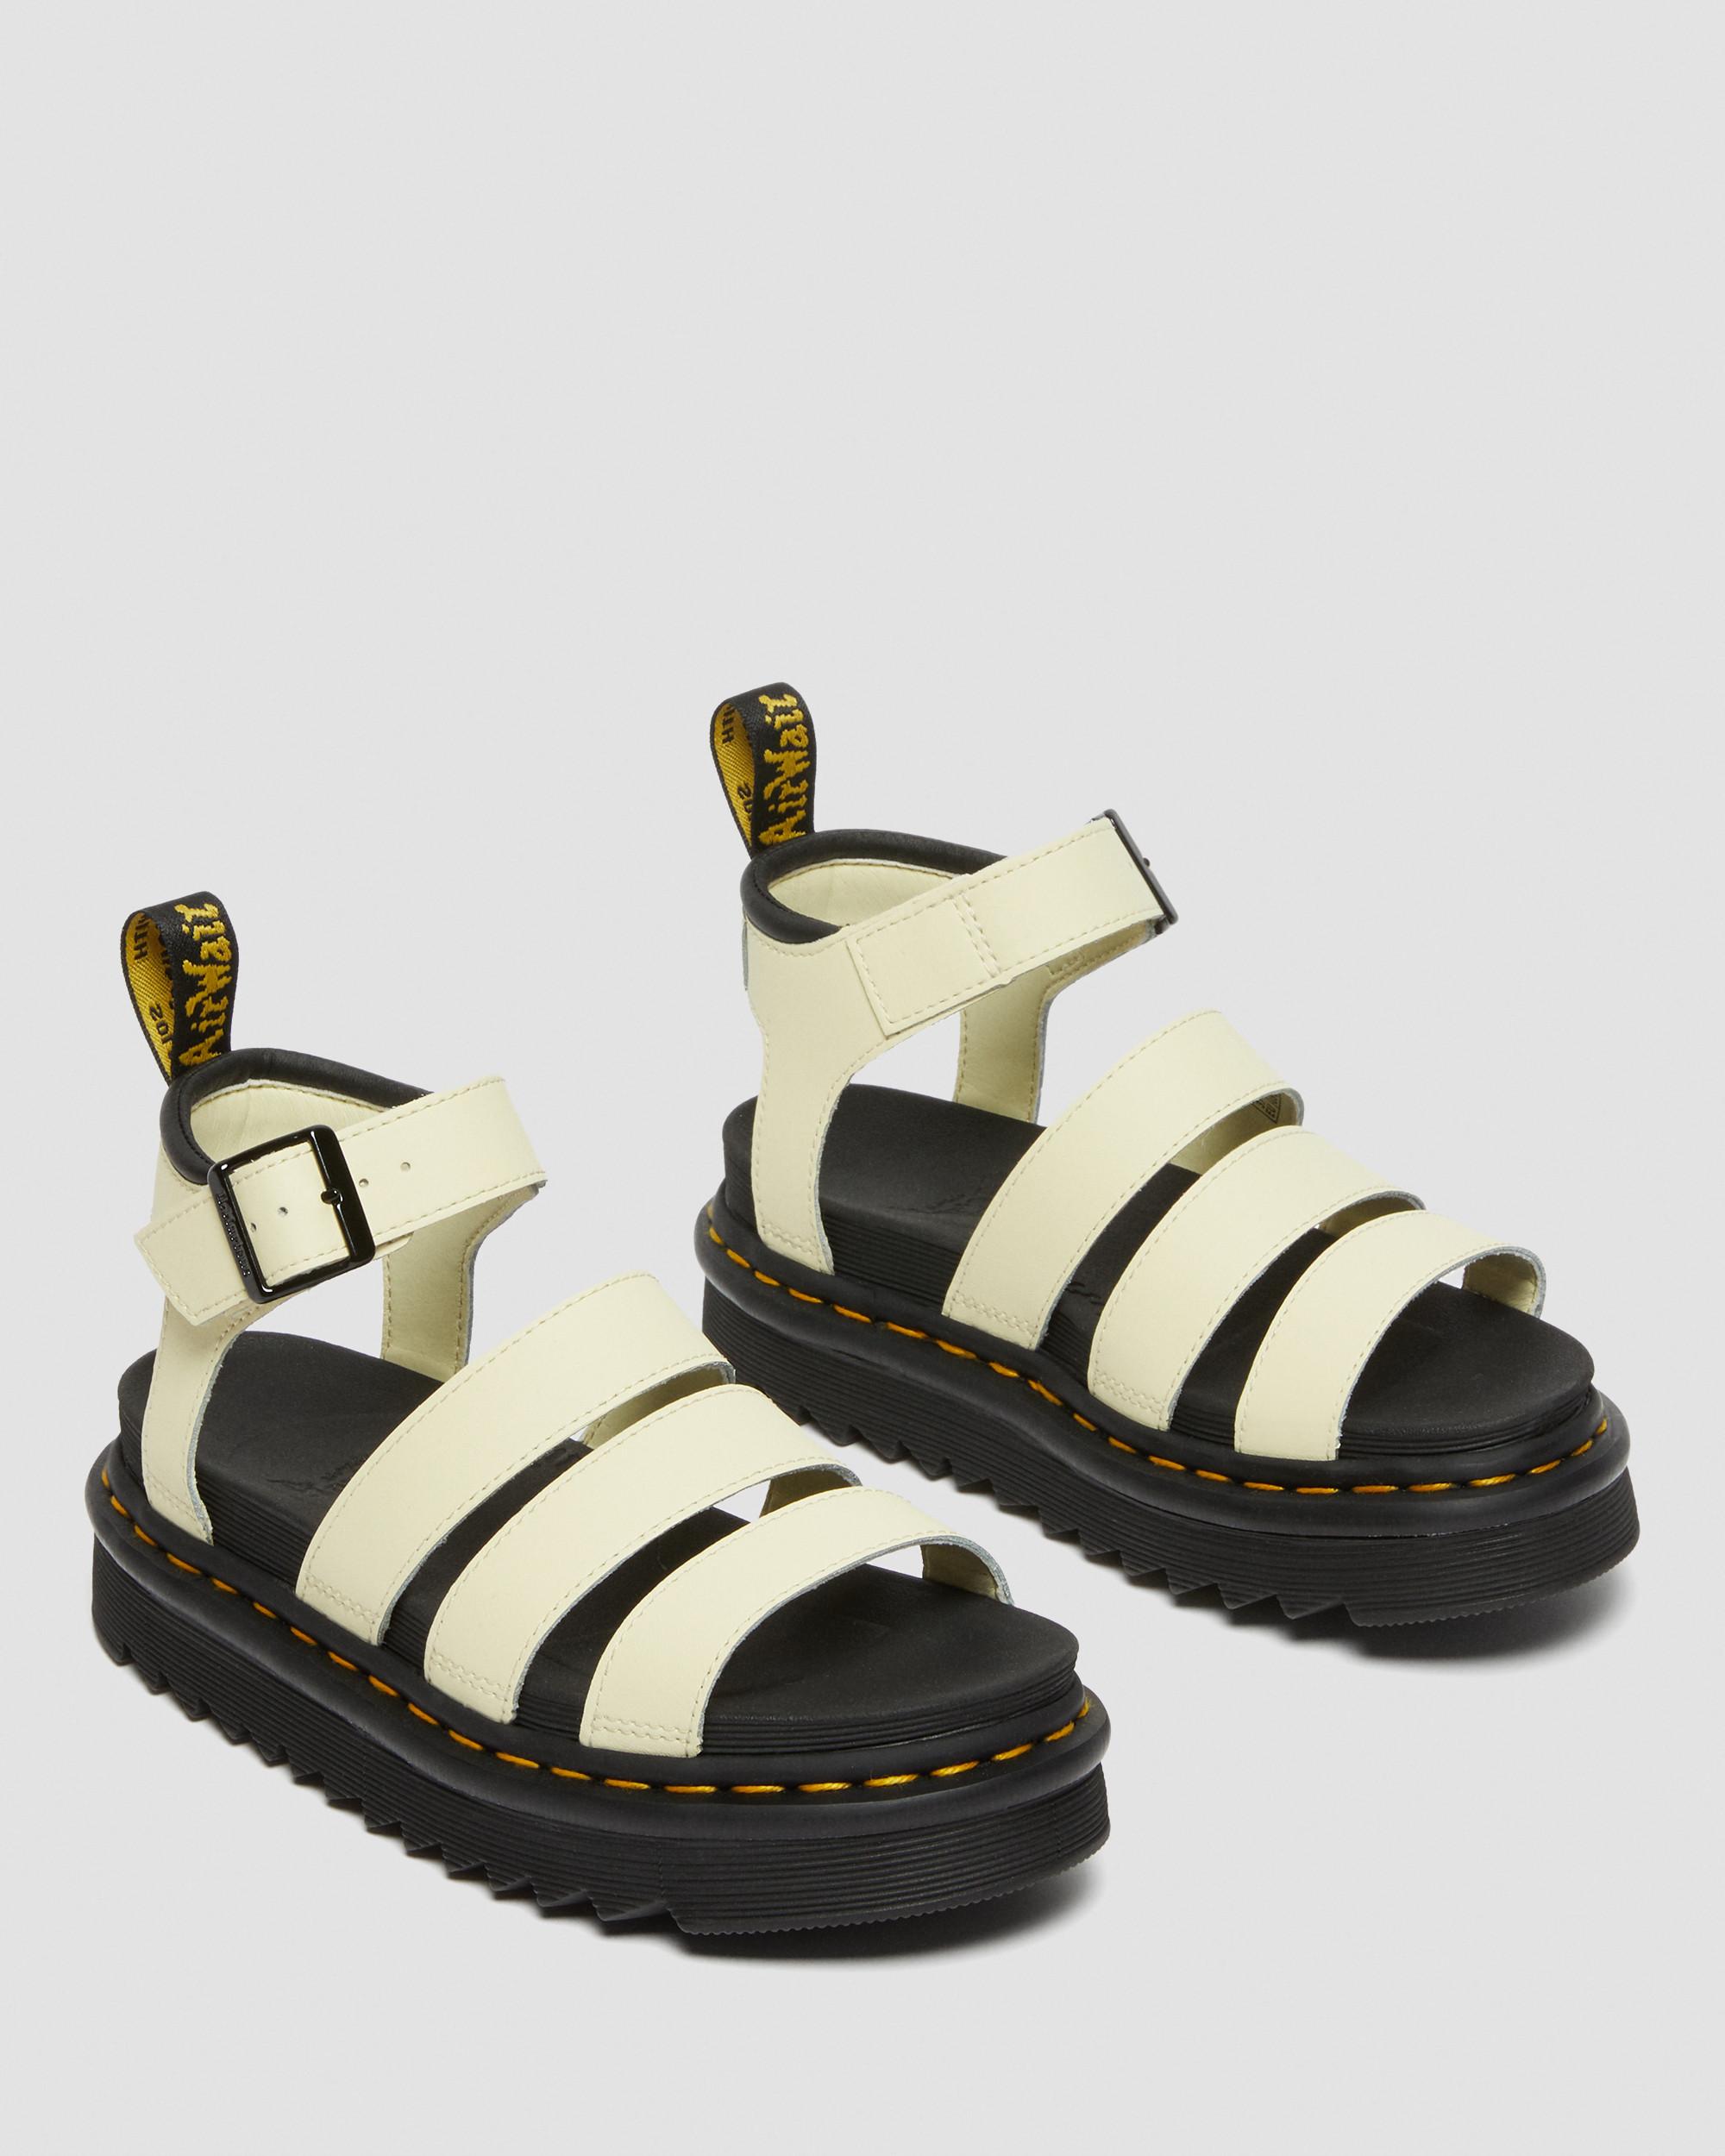 Blaire Hydro Leather Strap Sandals in Cream | Dr. Martens